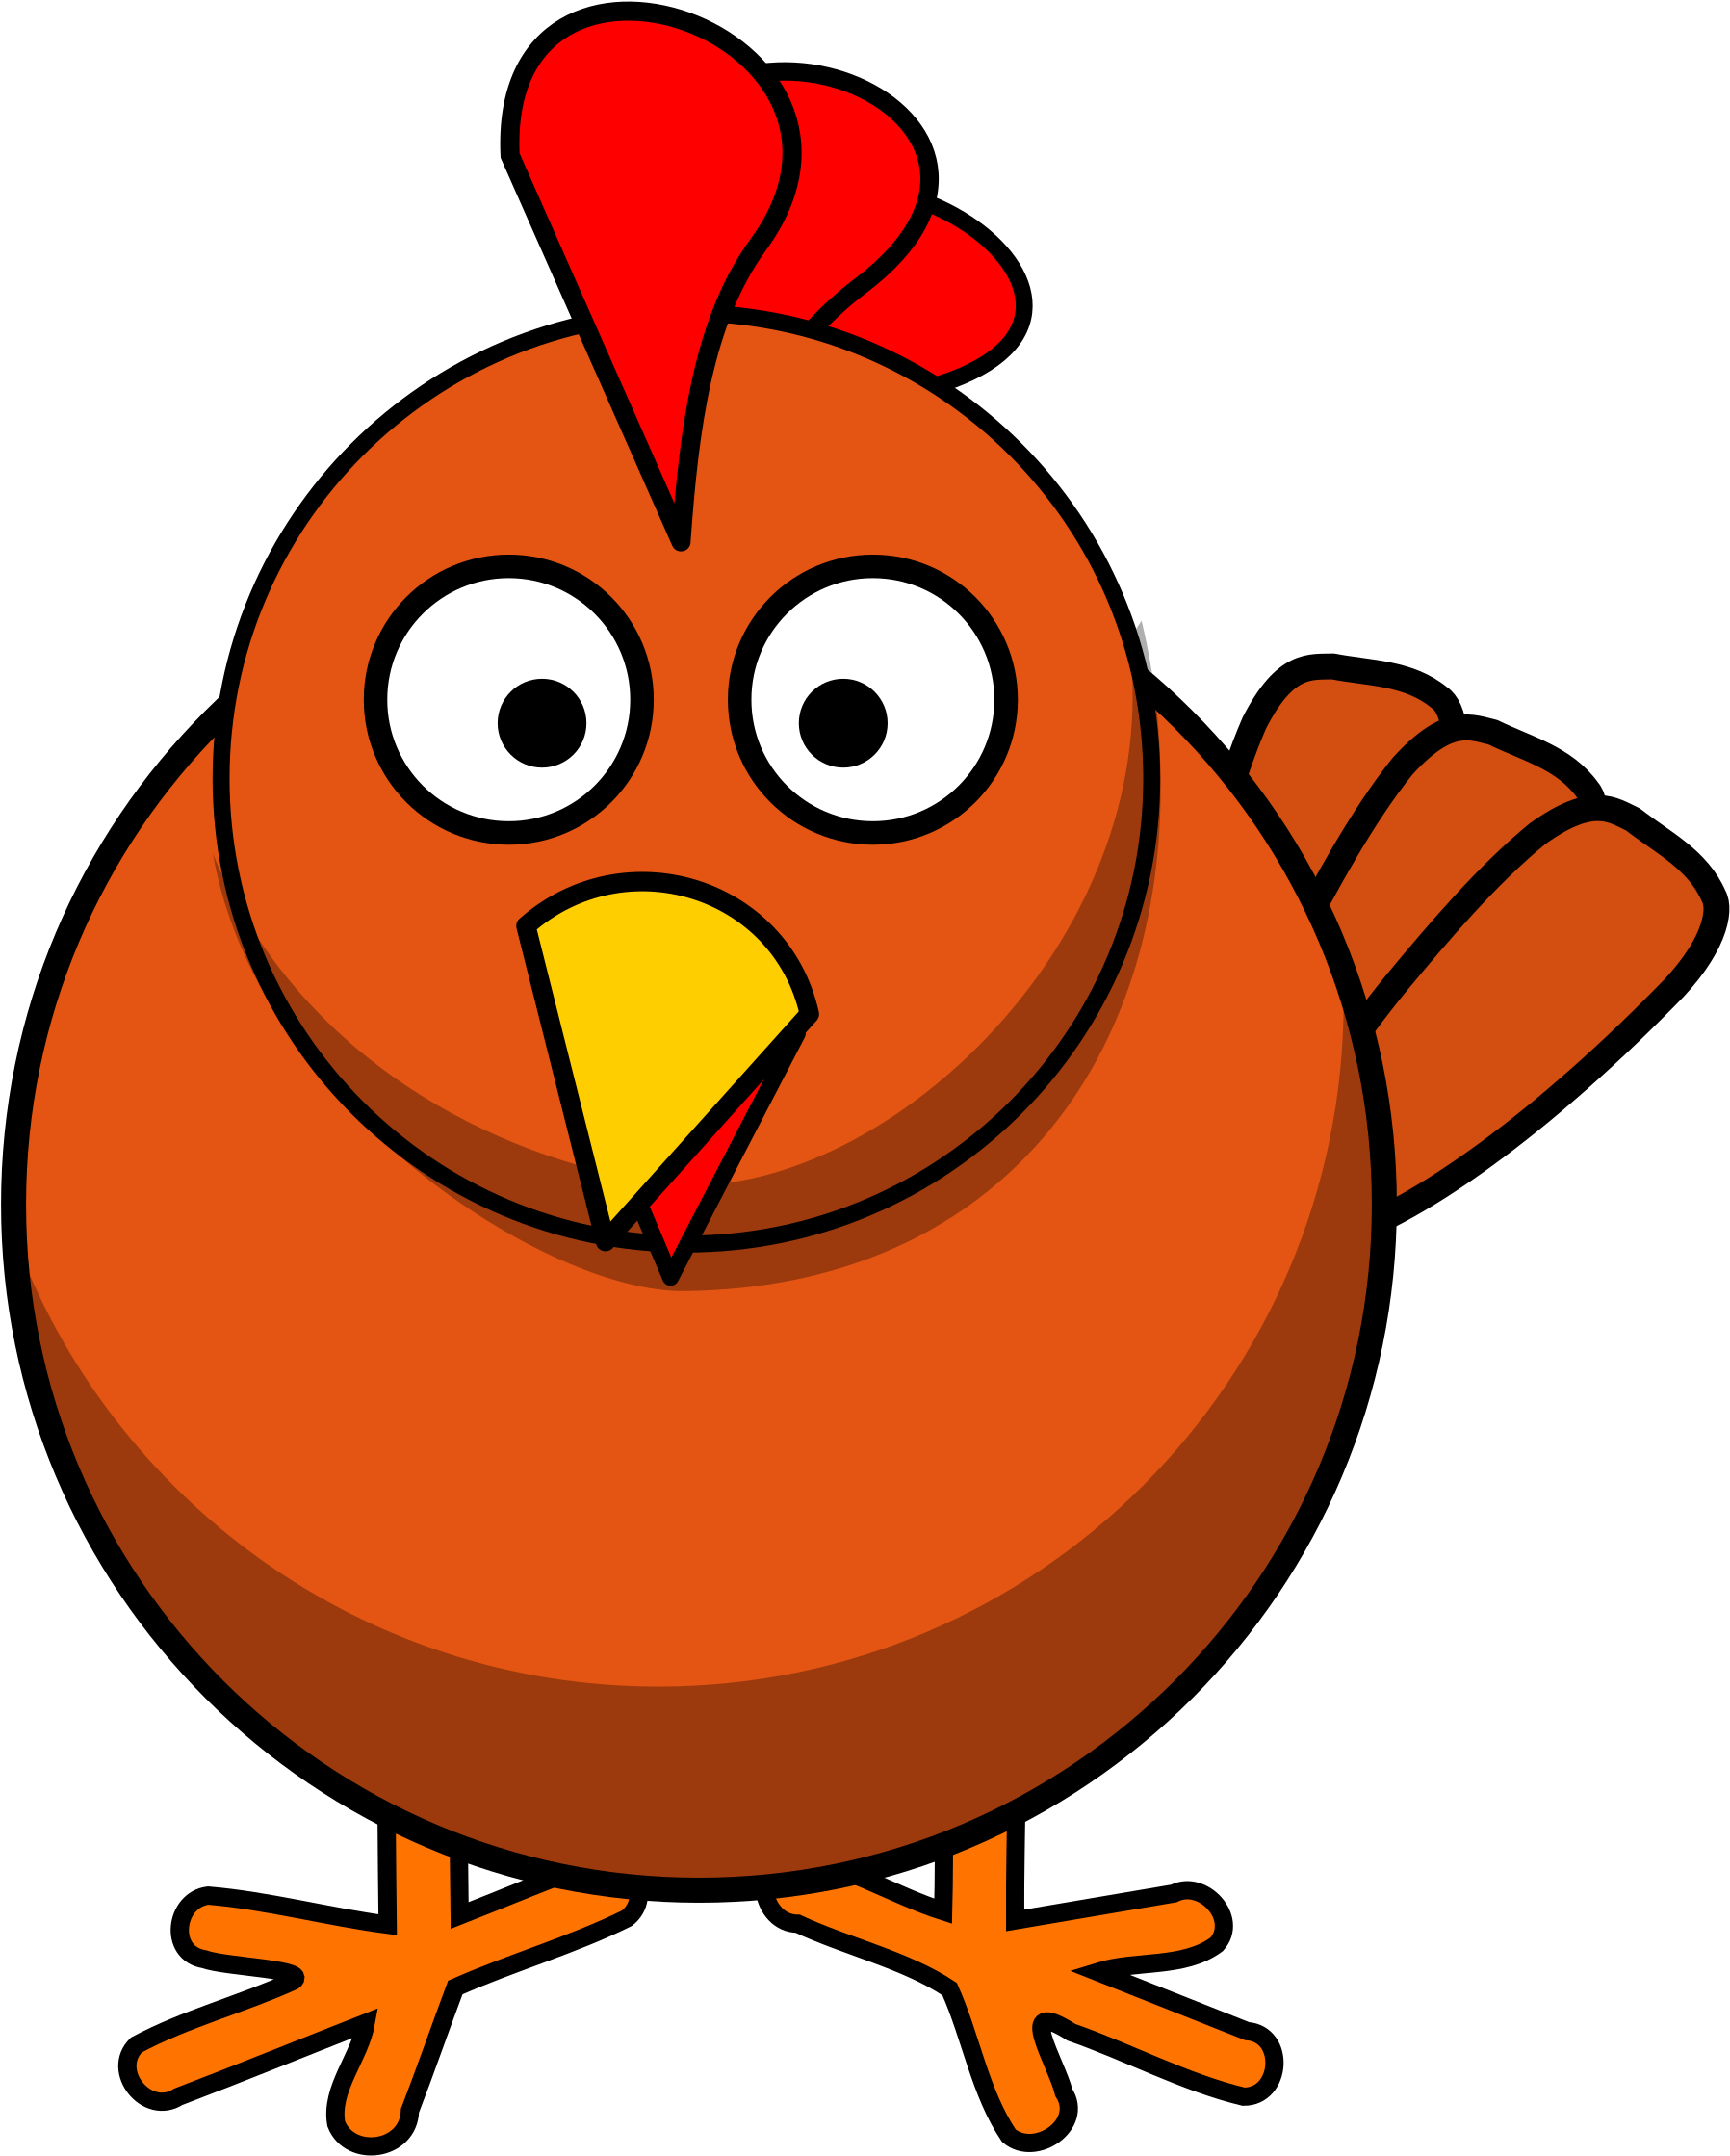 Free Chicken Clipart Transparent, Download Free Clip Art.